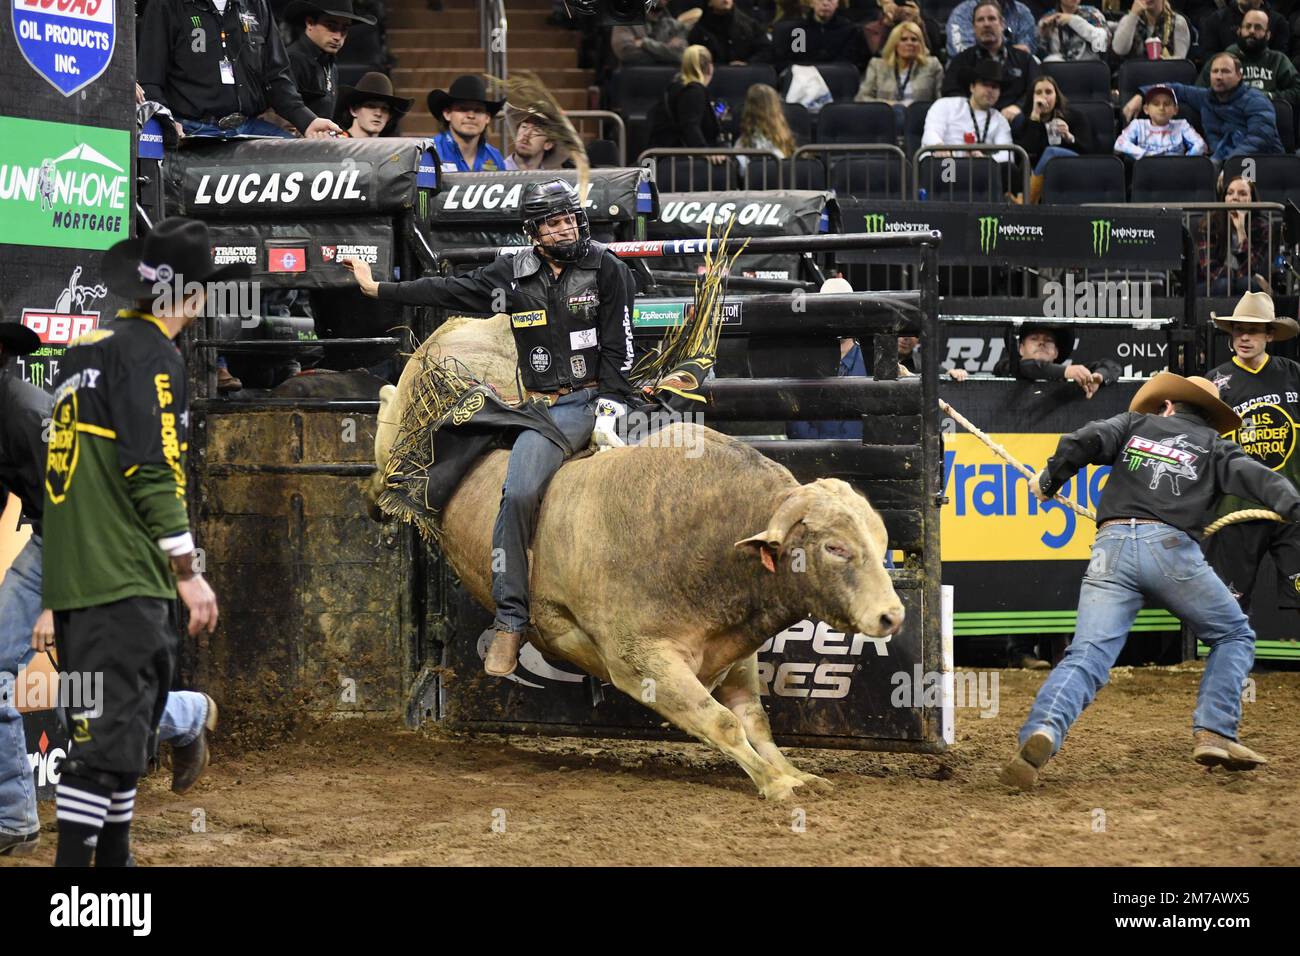 Professional Bull Rider Dener Barbosa rides bull Top Dollar during PBR  Monster Energy 'Buck Off' competition at Madison Square Garden, New York,  NY, January 8, 2023. PBR had its 30th anniversary season